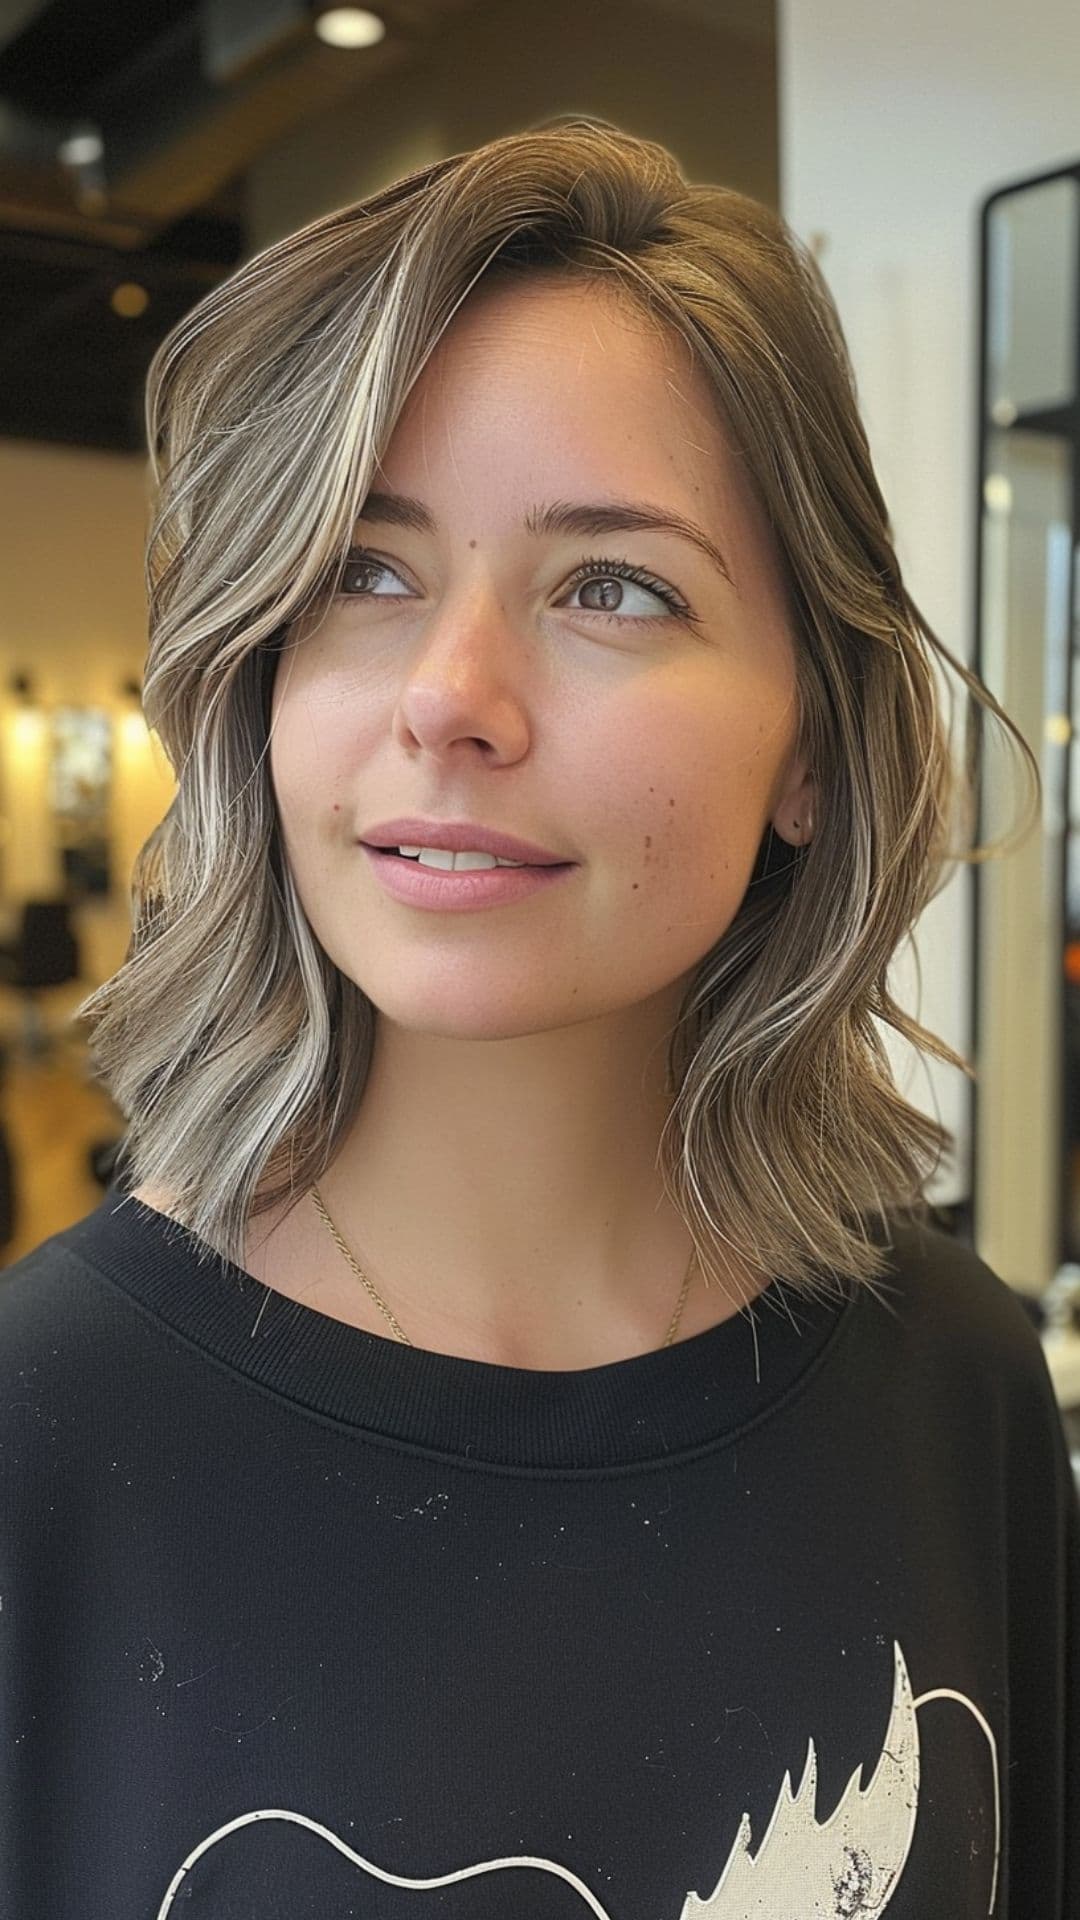 A woman modelling a layered lob with side part.